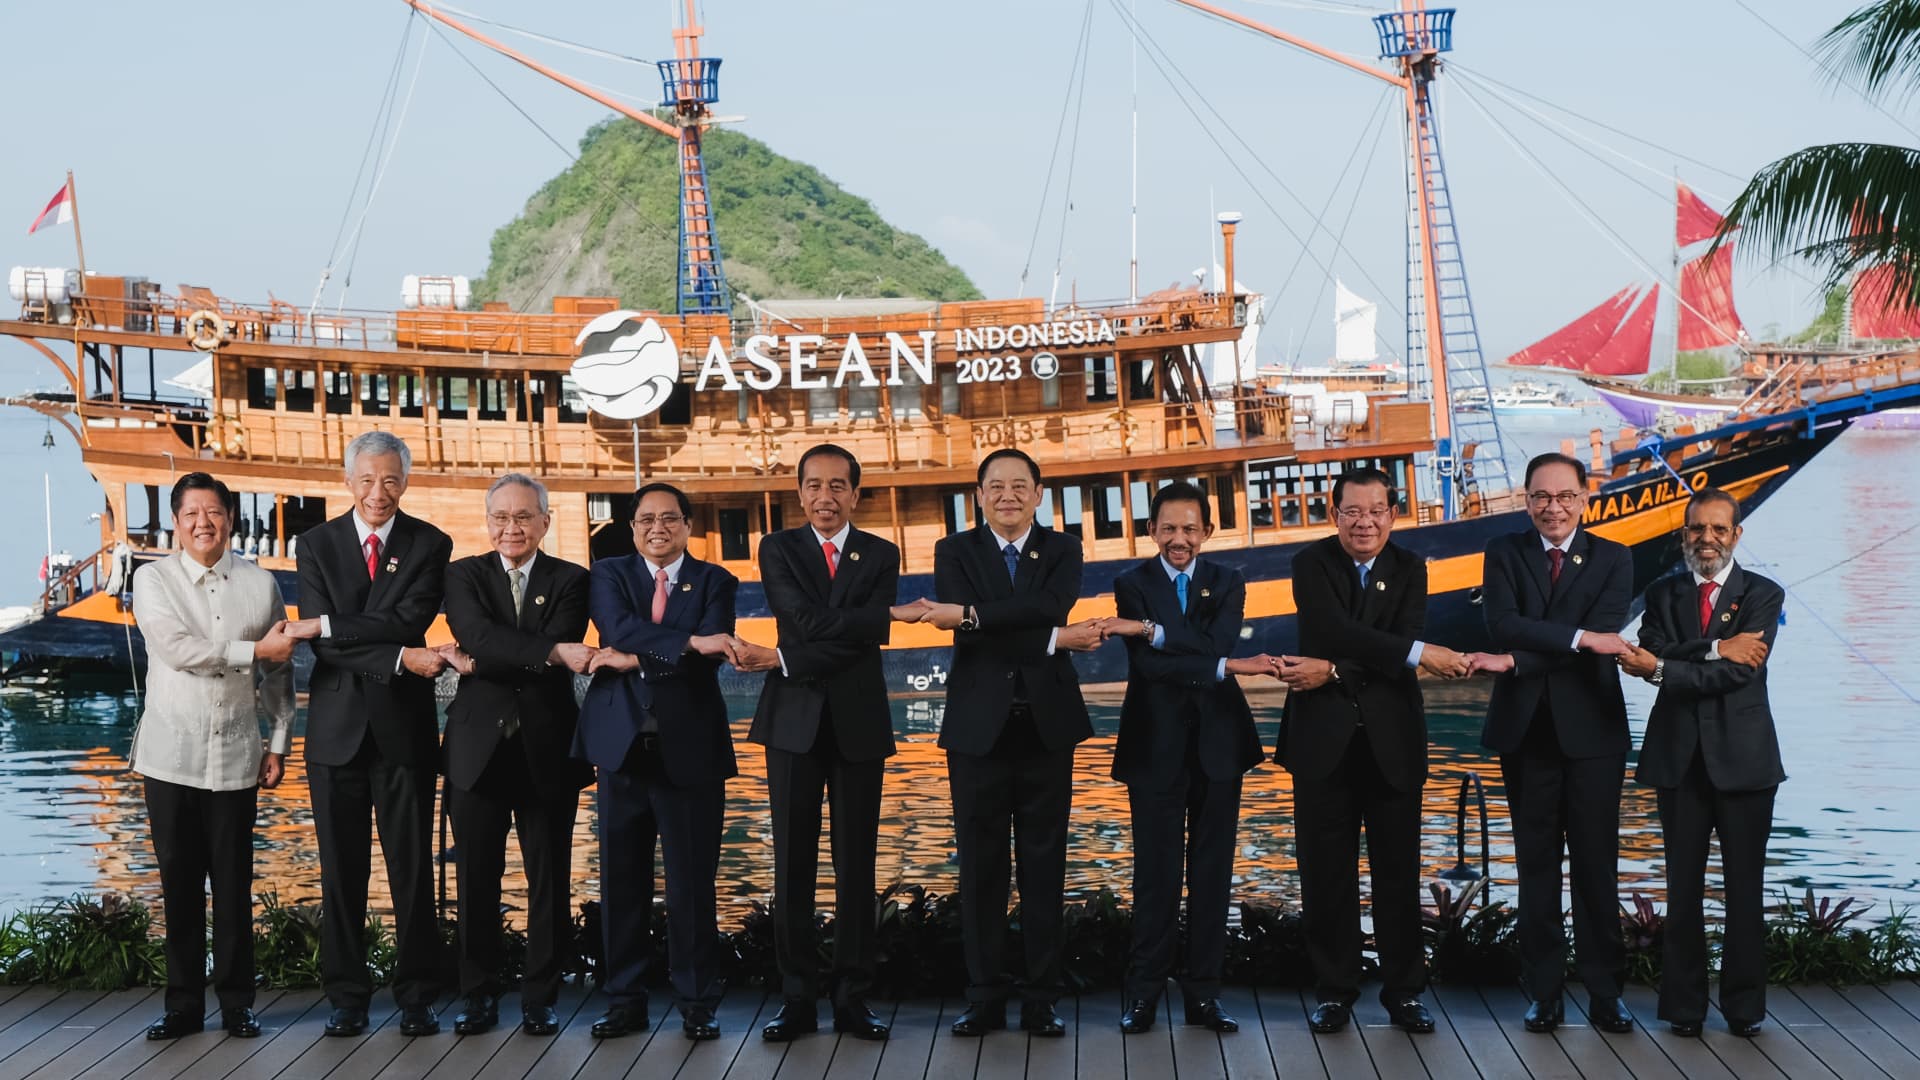 Leaders of the Association of Southeast Asian nations meeting at the 42nd ASEAN Summit in Labuan Bajo, in East Nusa Tenggara province, Indonesia on May 10, 2023.